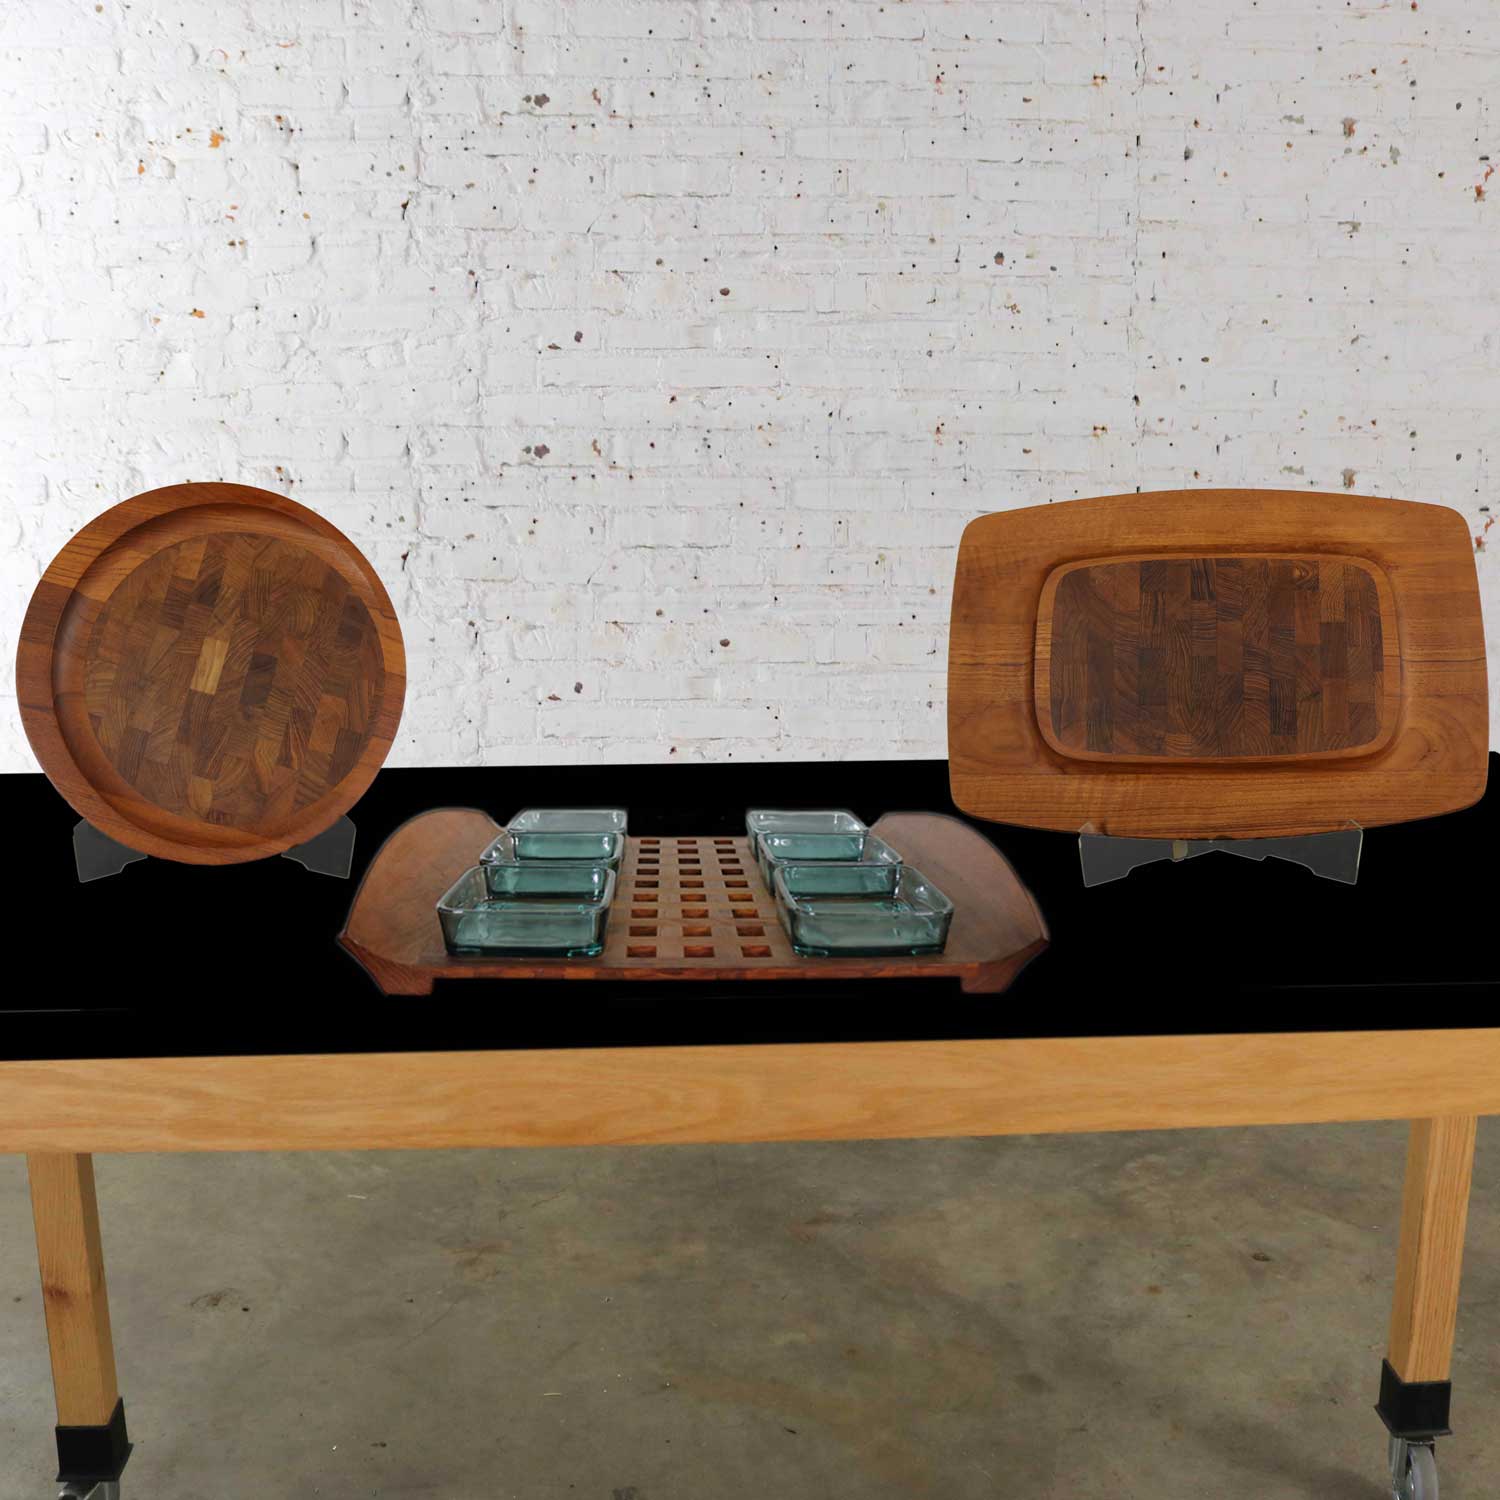 Selection of 3 Dansk Designs Teak Trays or Cutting Boards by Jens Quistgaard